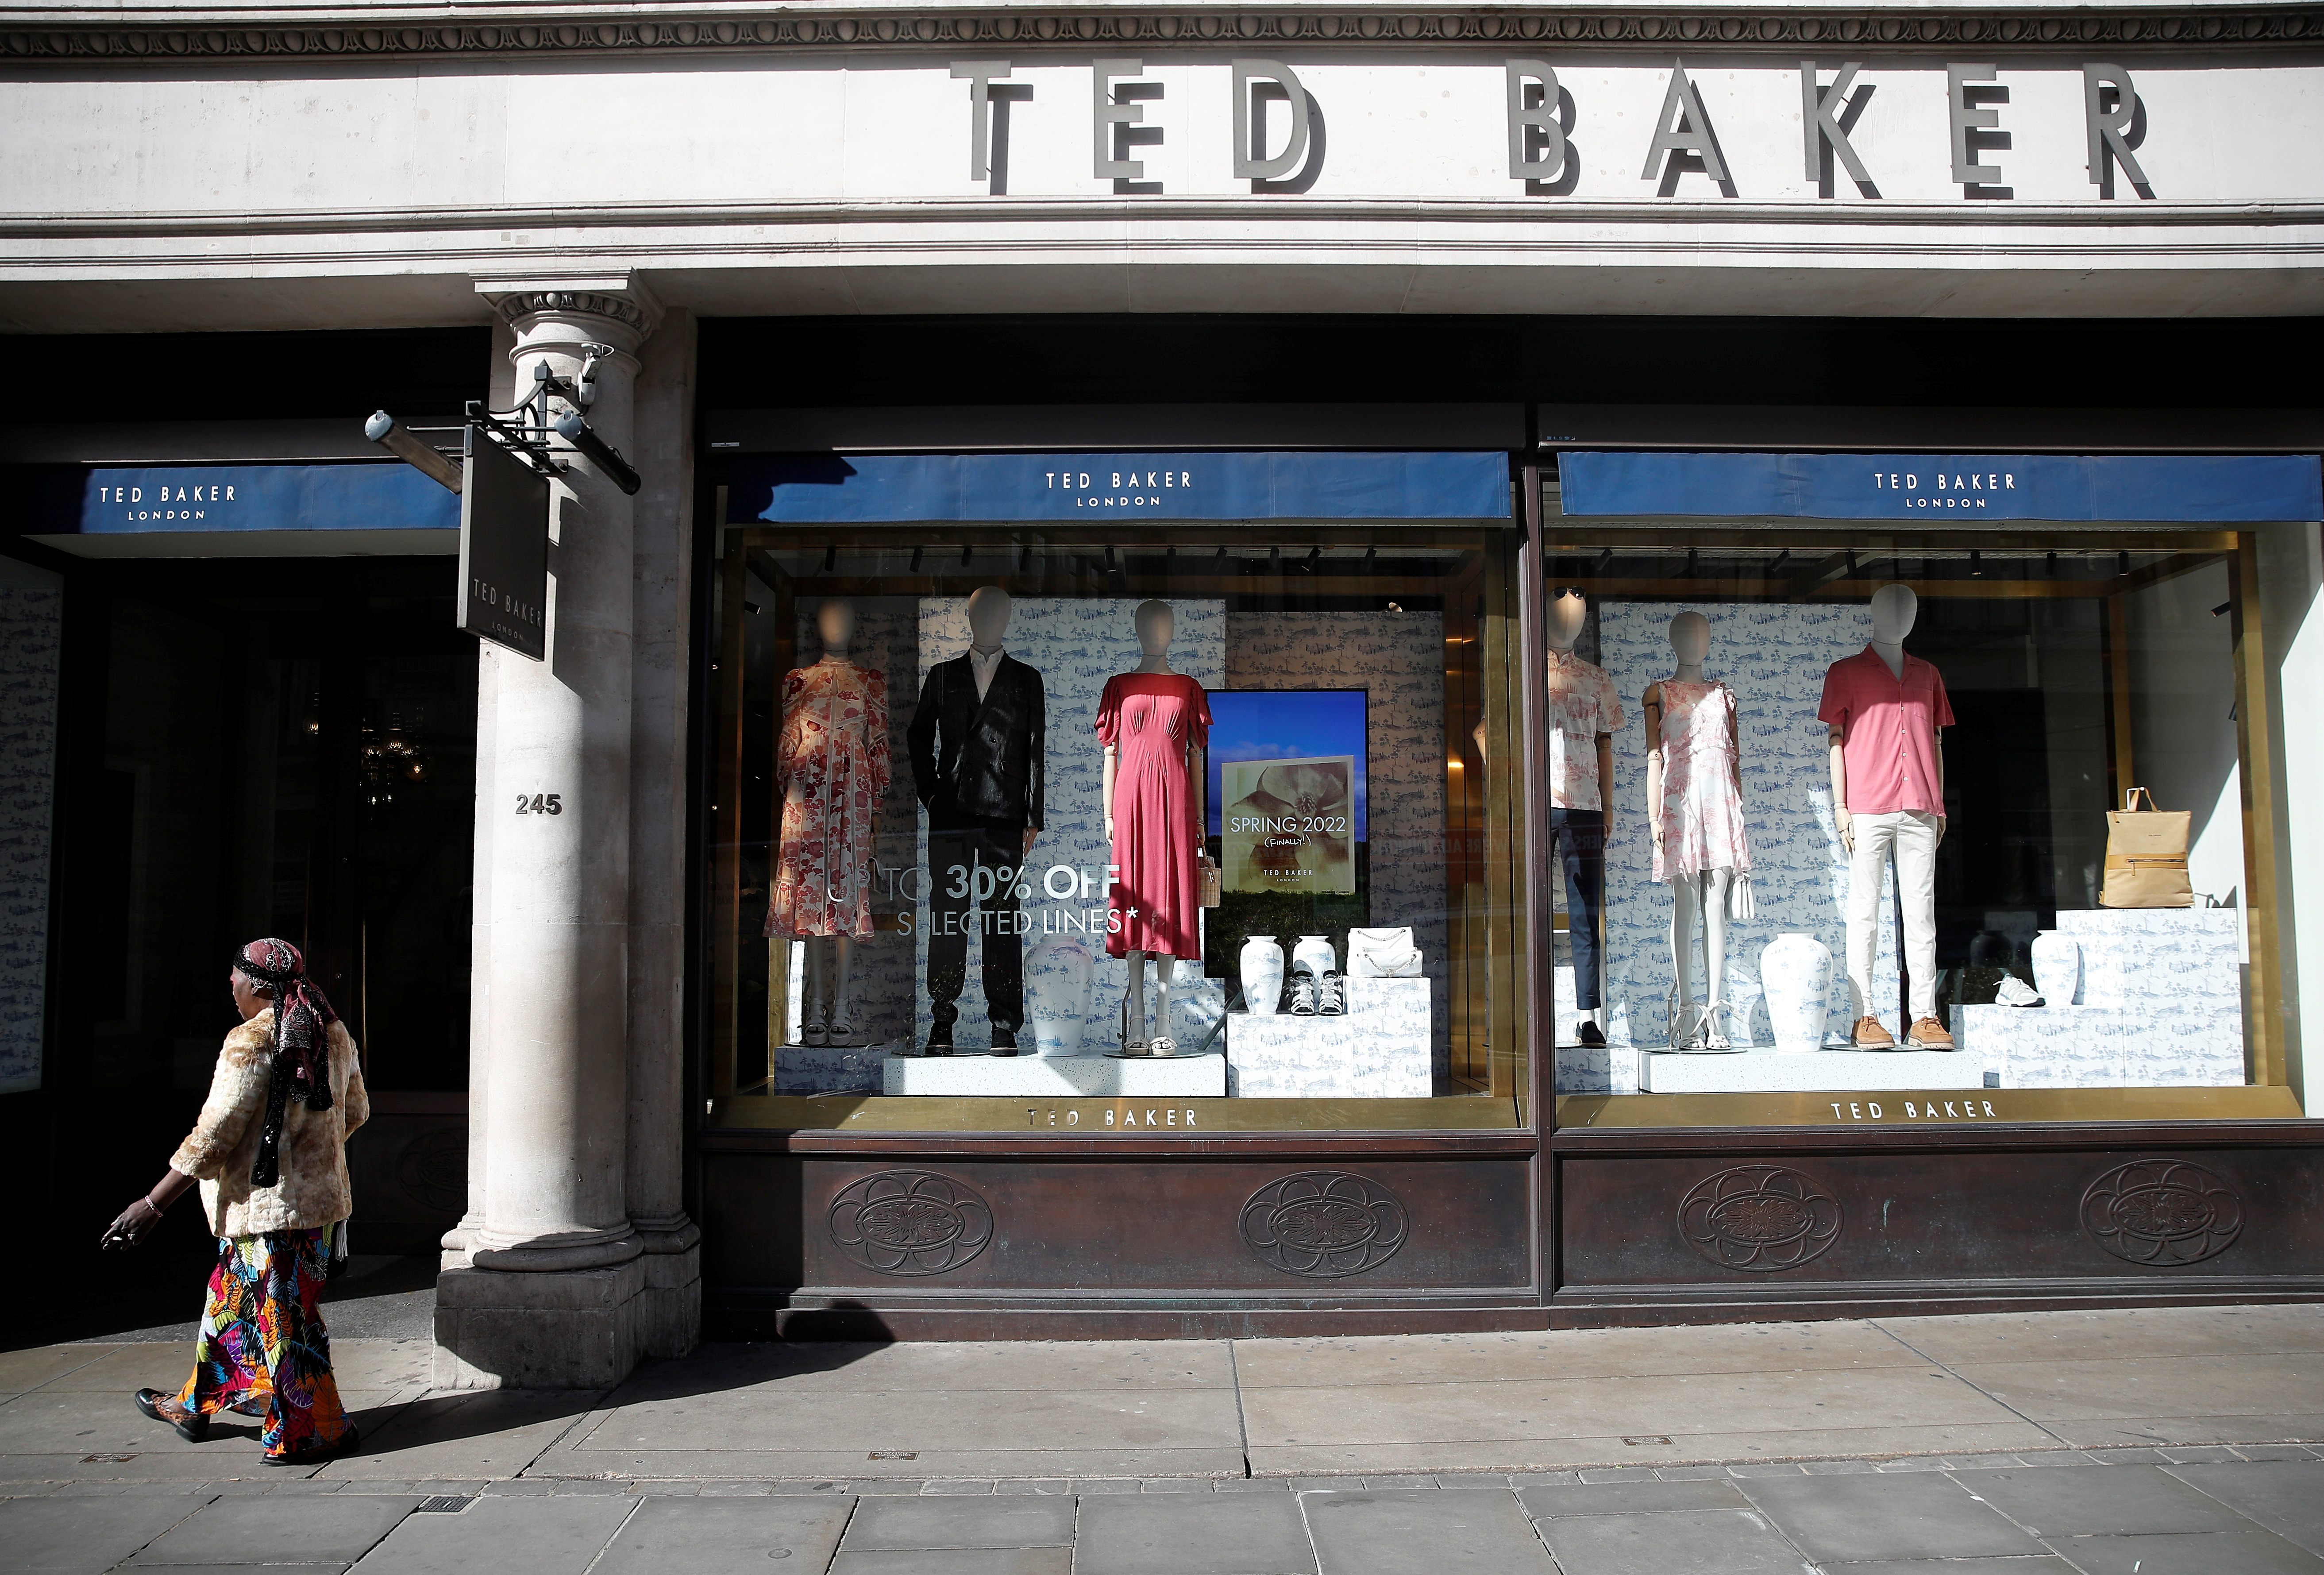 Ted Baker On 5th Avenue - London Fashion In New York